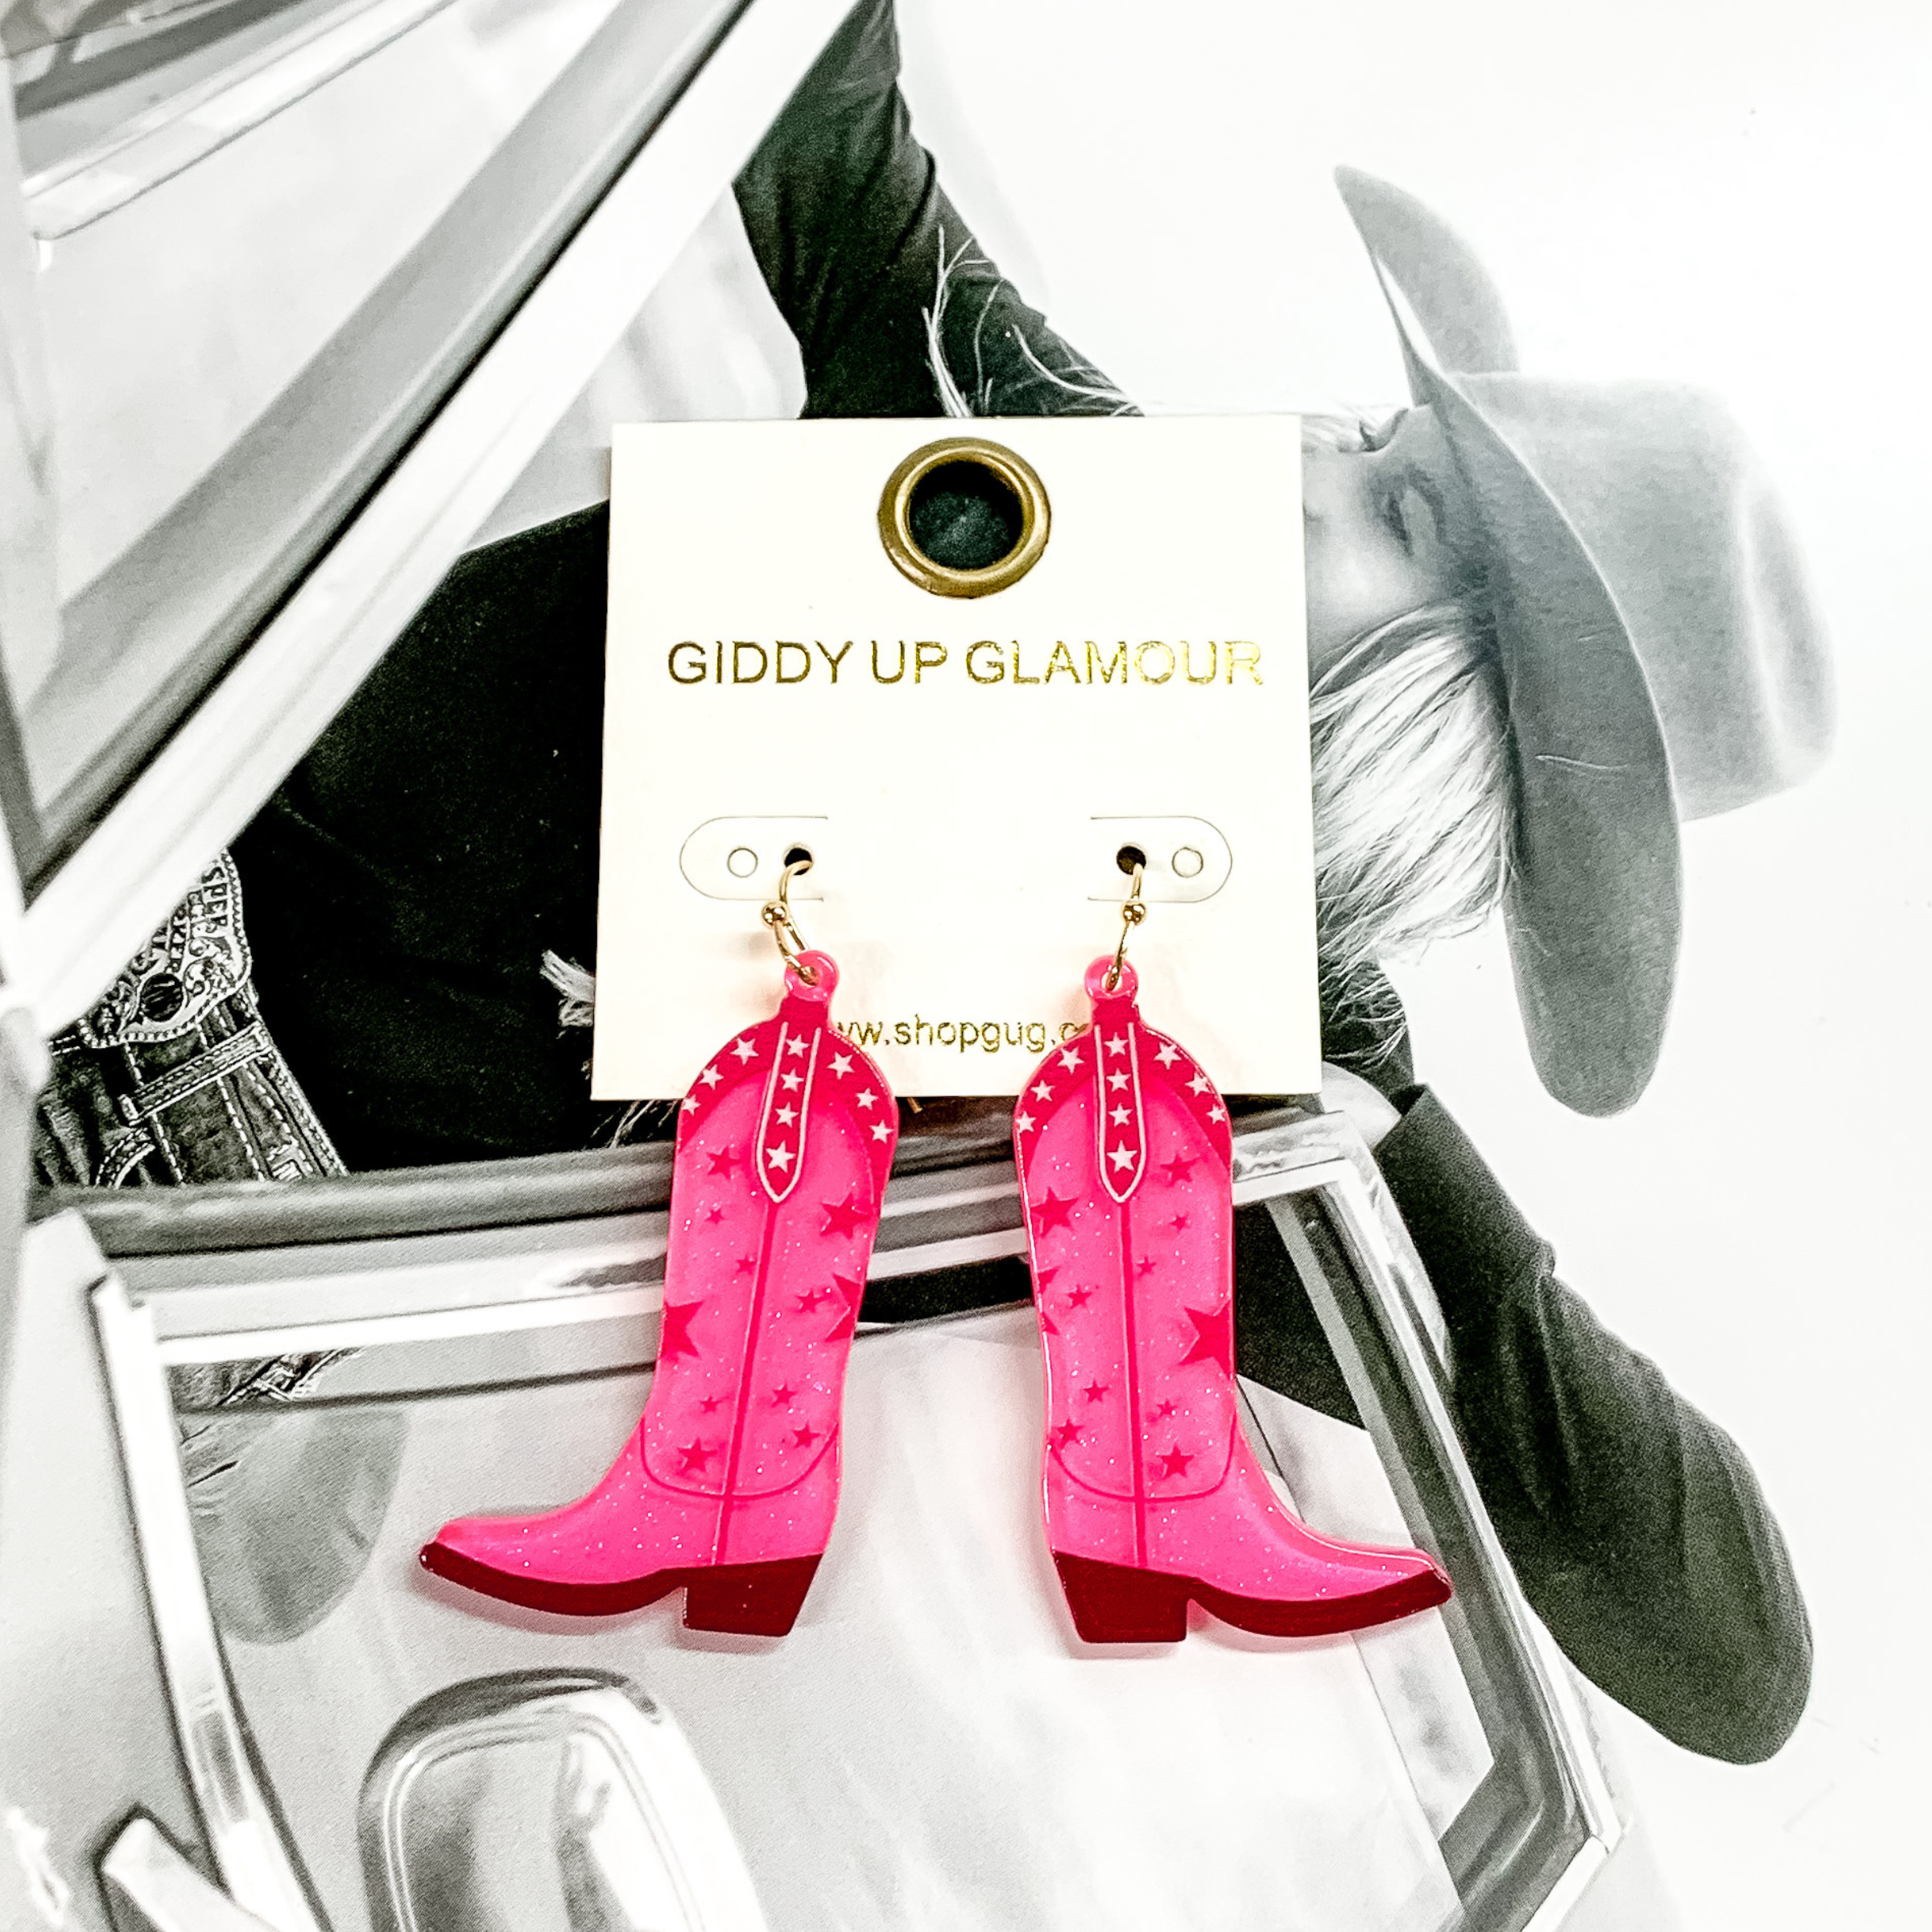 Cowboy boot dangle pink earrings pictured on a white earrings holder. These earrings have a star print and dark colored sole. These earrings are pictured on a black and white picture of a girl. 